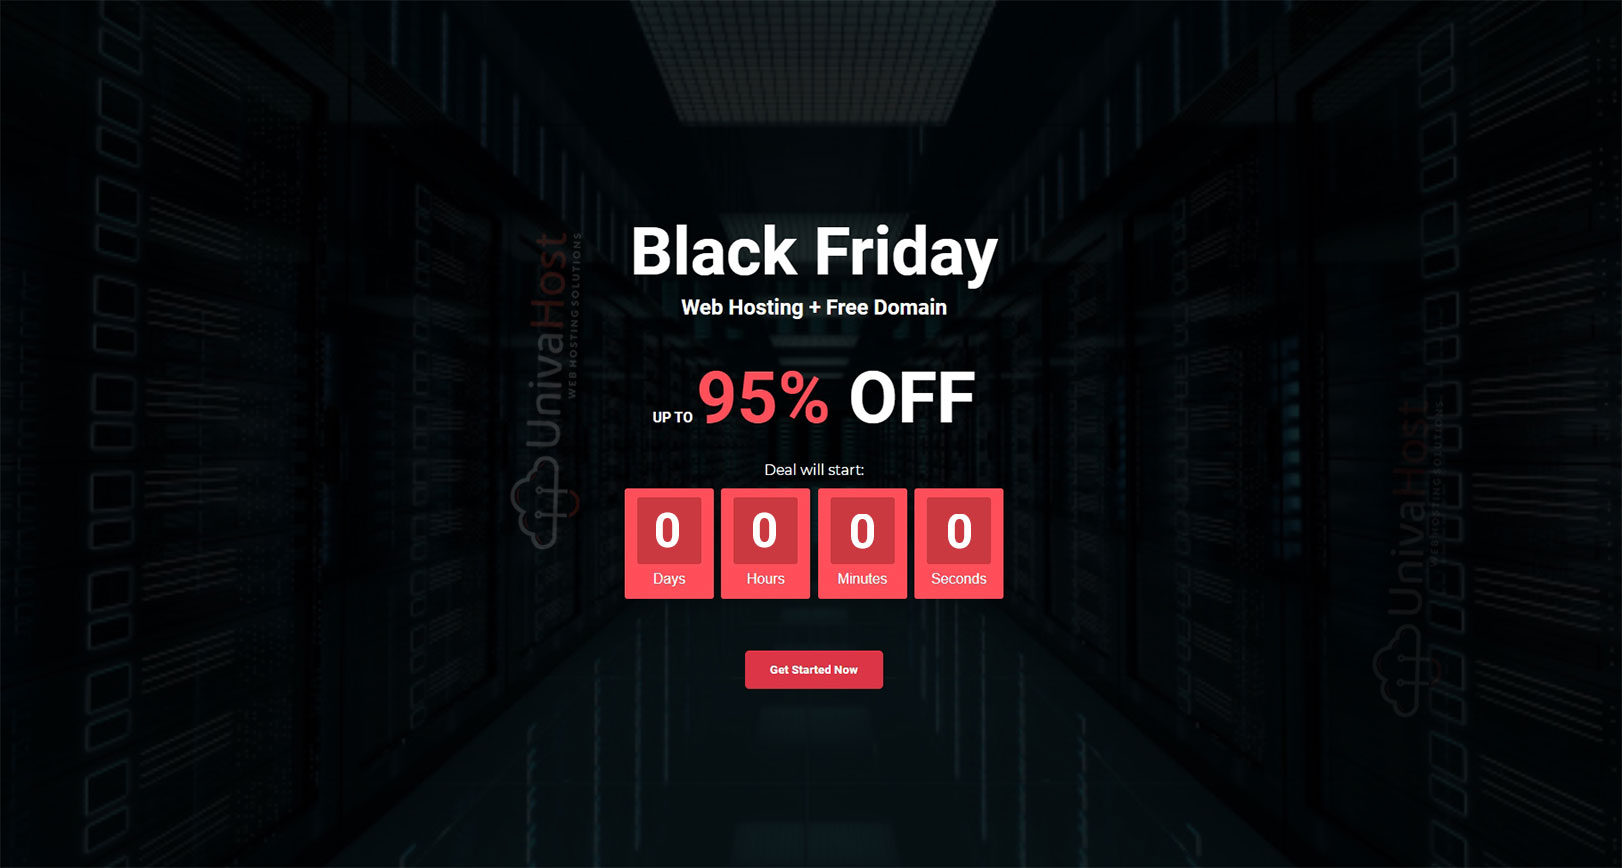 Univahost Black Friday And Cyber Monday 2020 Super Deal On Domain Hosting